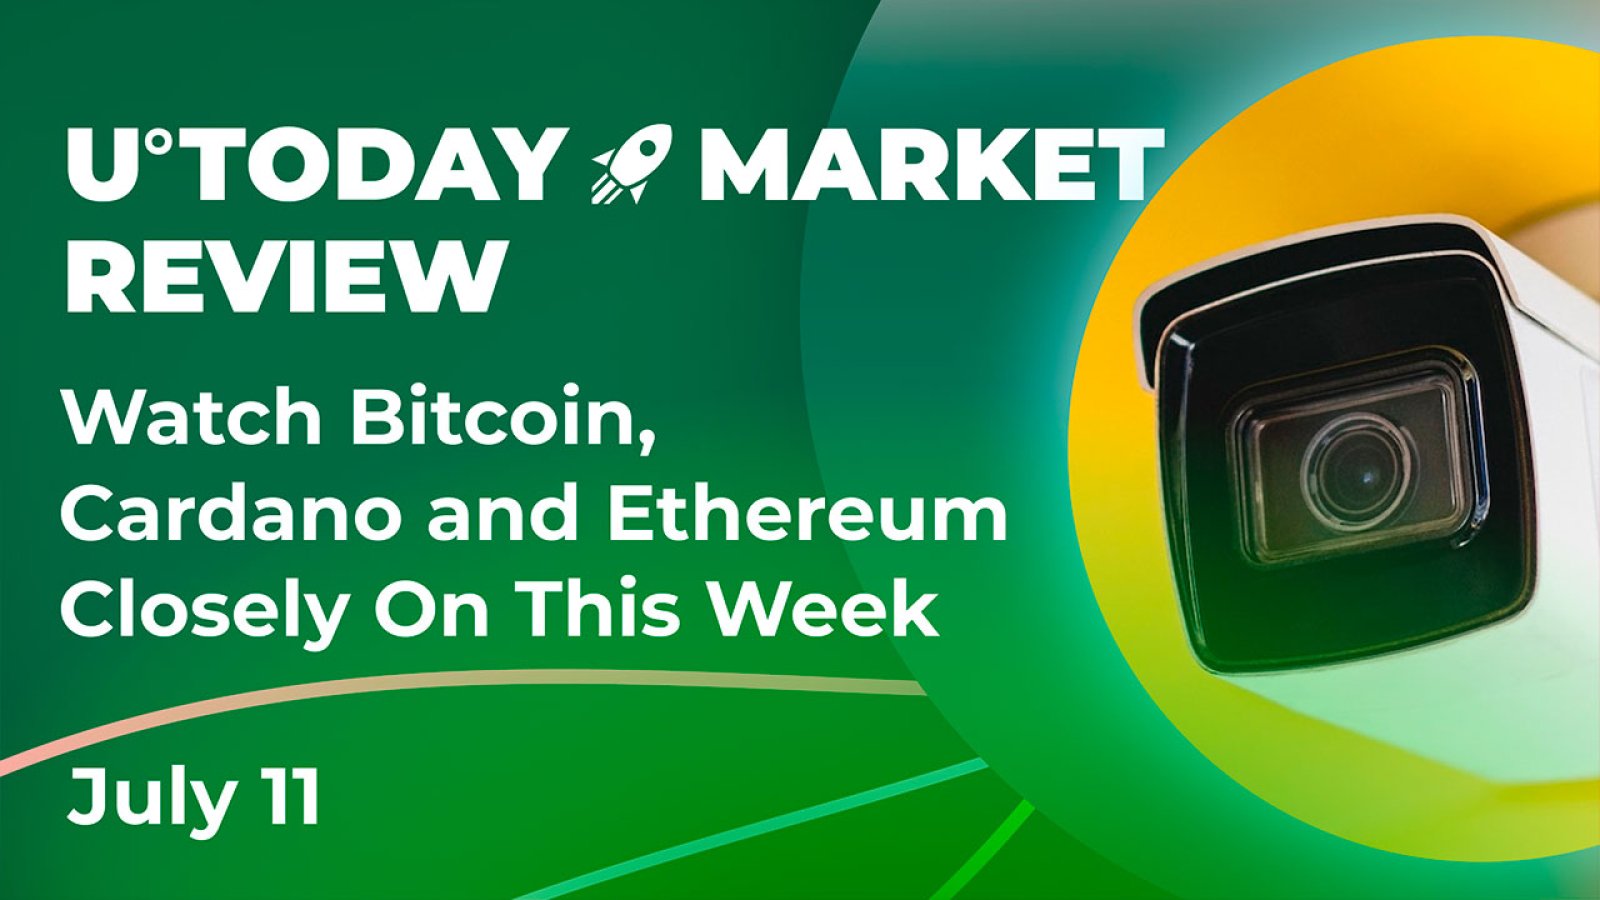 Watch Bitcoin, Cardano and Ethereum Closely This Week: Crypto Market Review, July 11